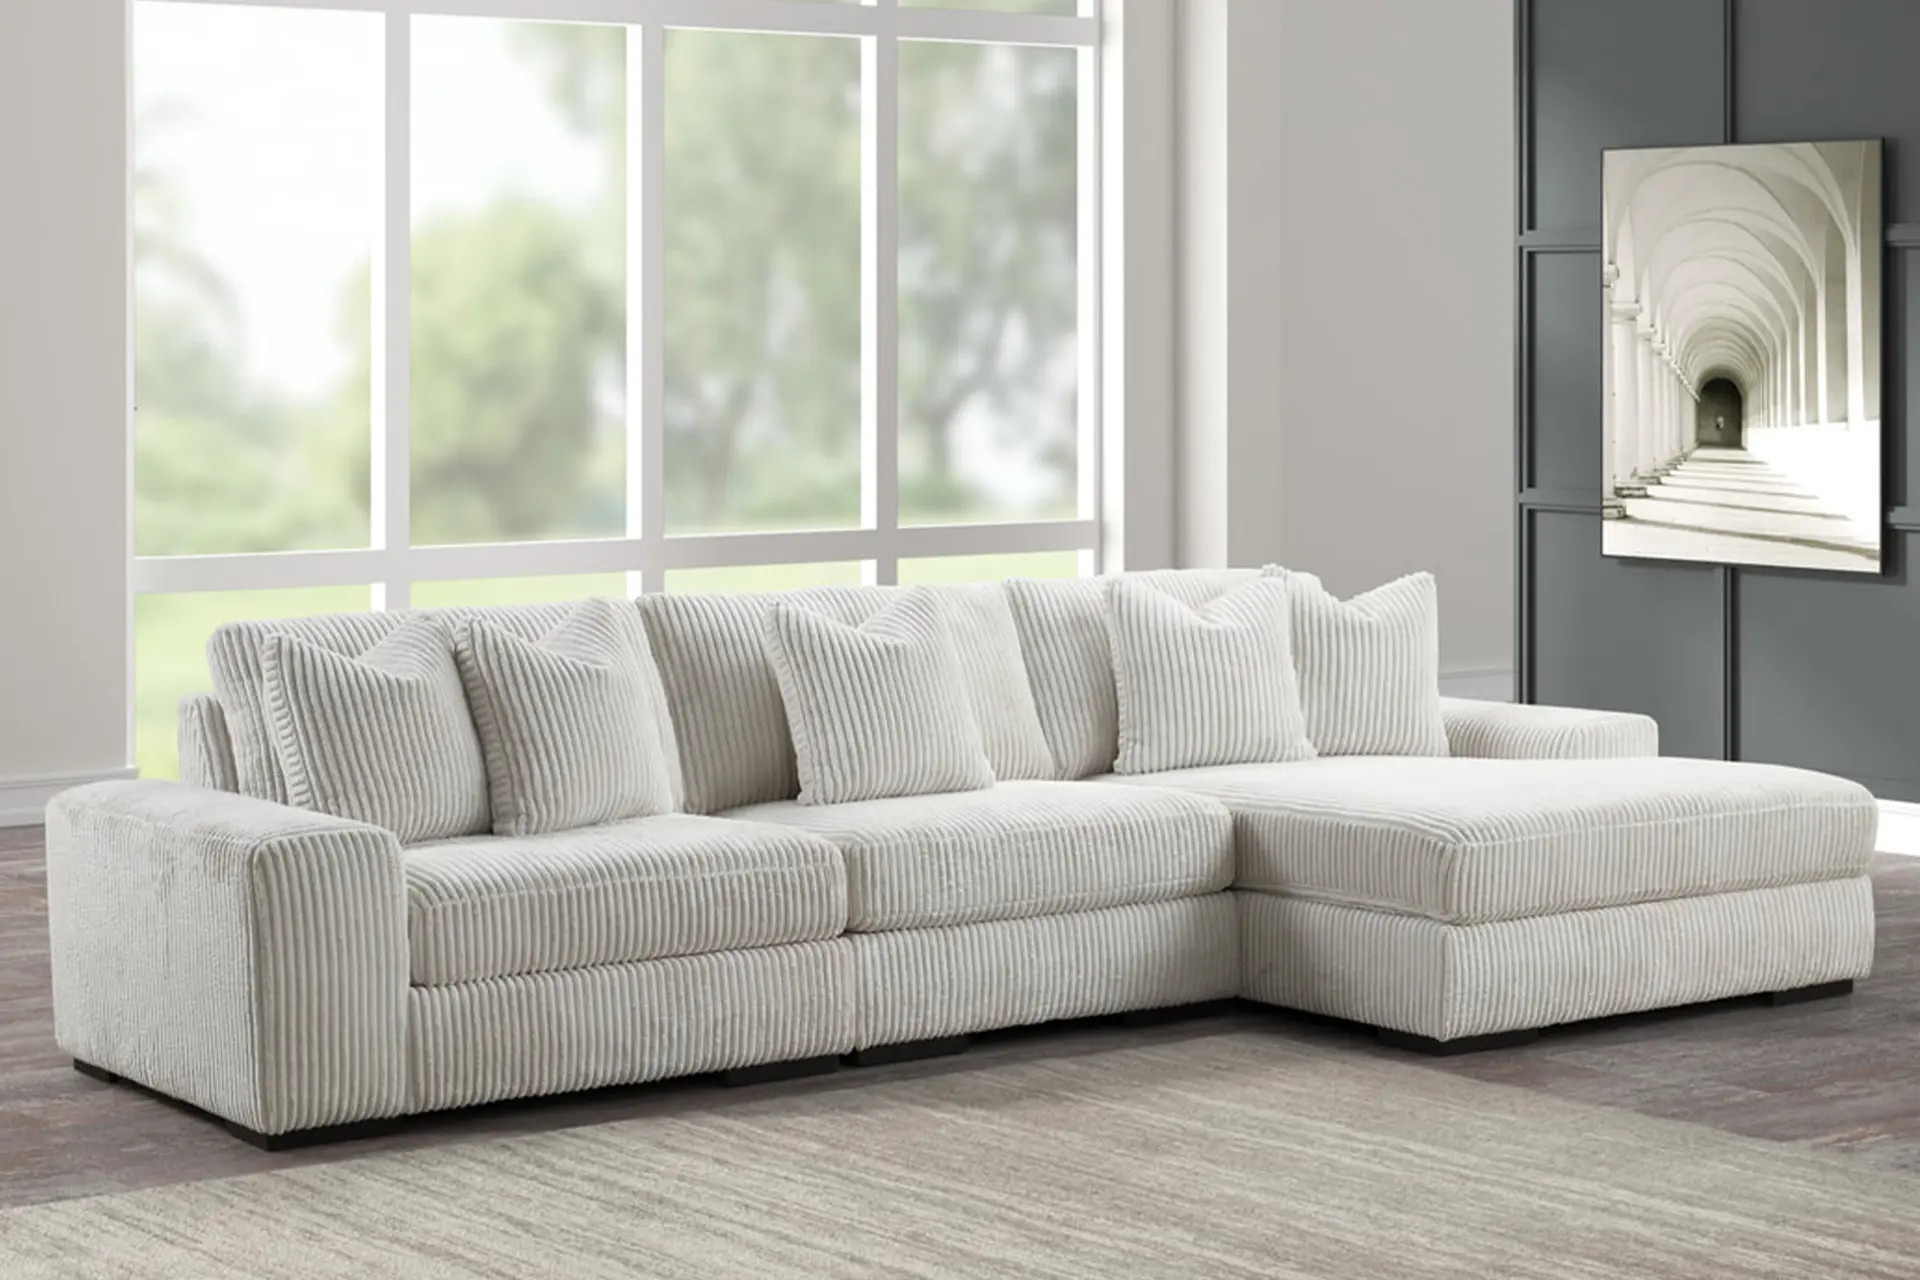 Sunday Beige 3-Piece Sectional.